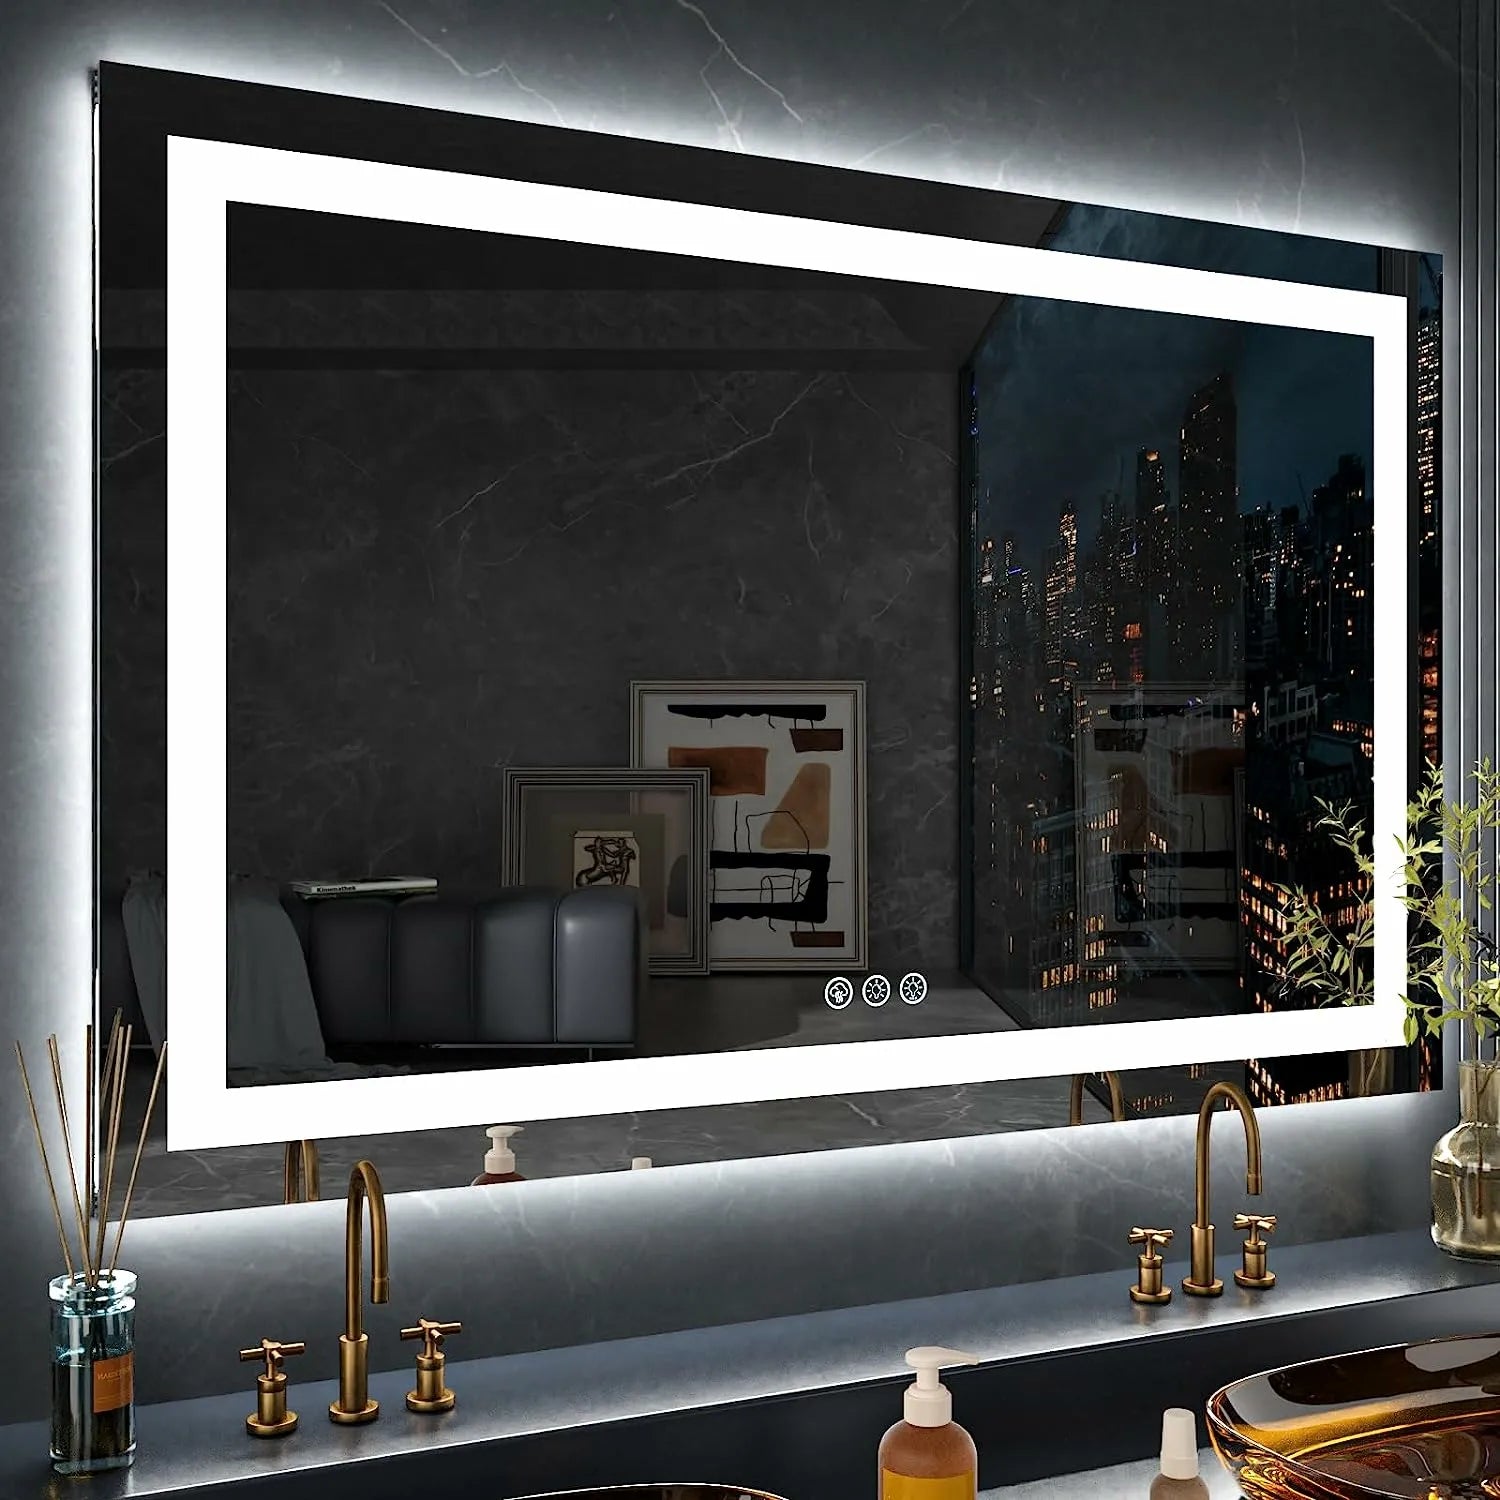 Large RGB Backlit Bathroom Vanity Mirror with Lights Front Lighted Memory Function Anti-Fog